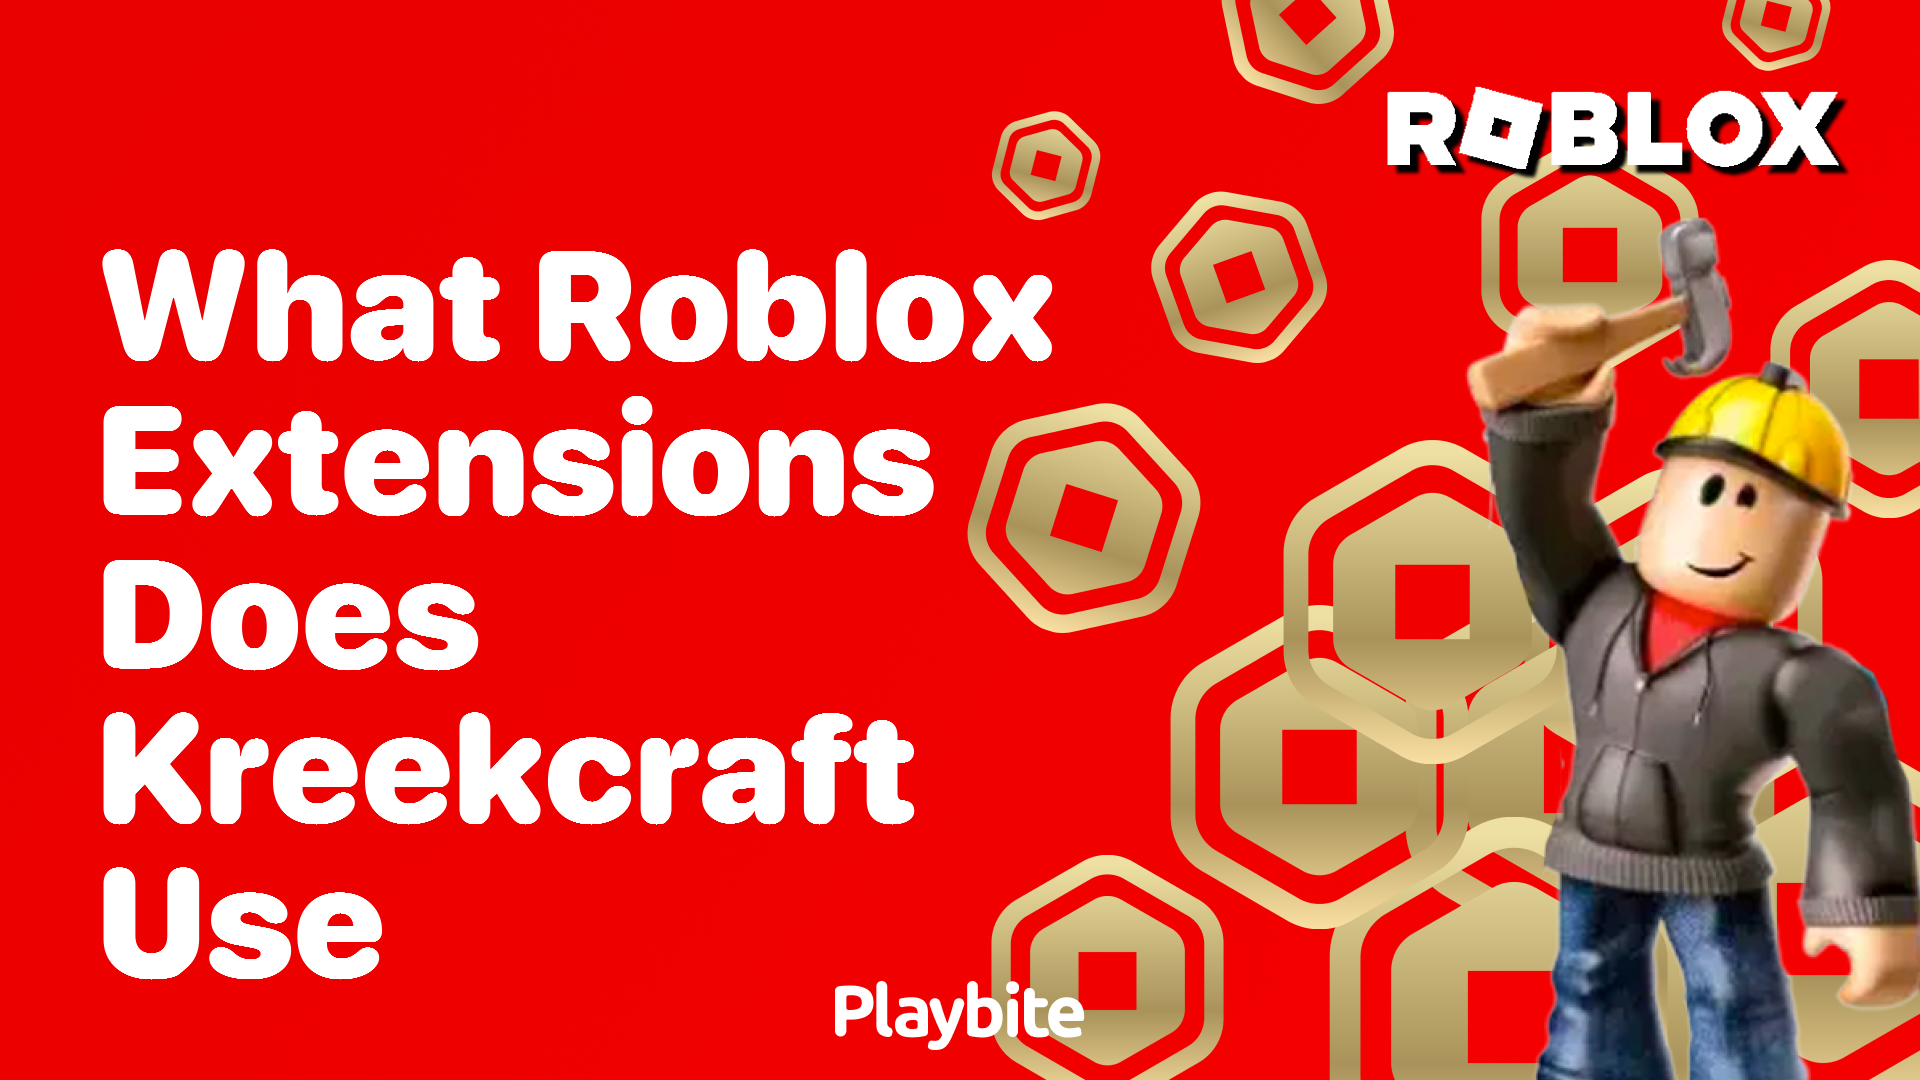 What Roblox Extensions Does KreekCraft Use?